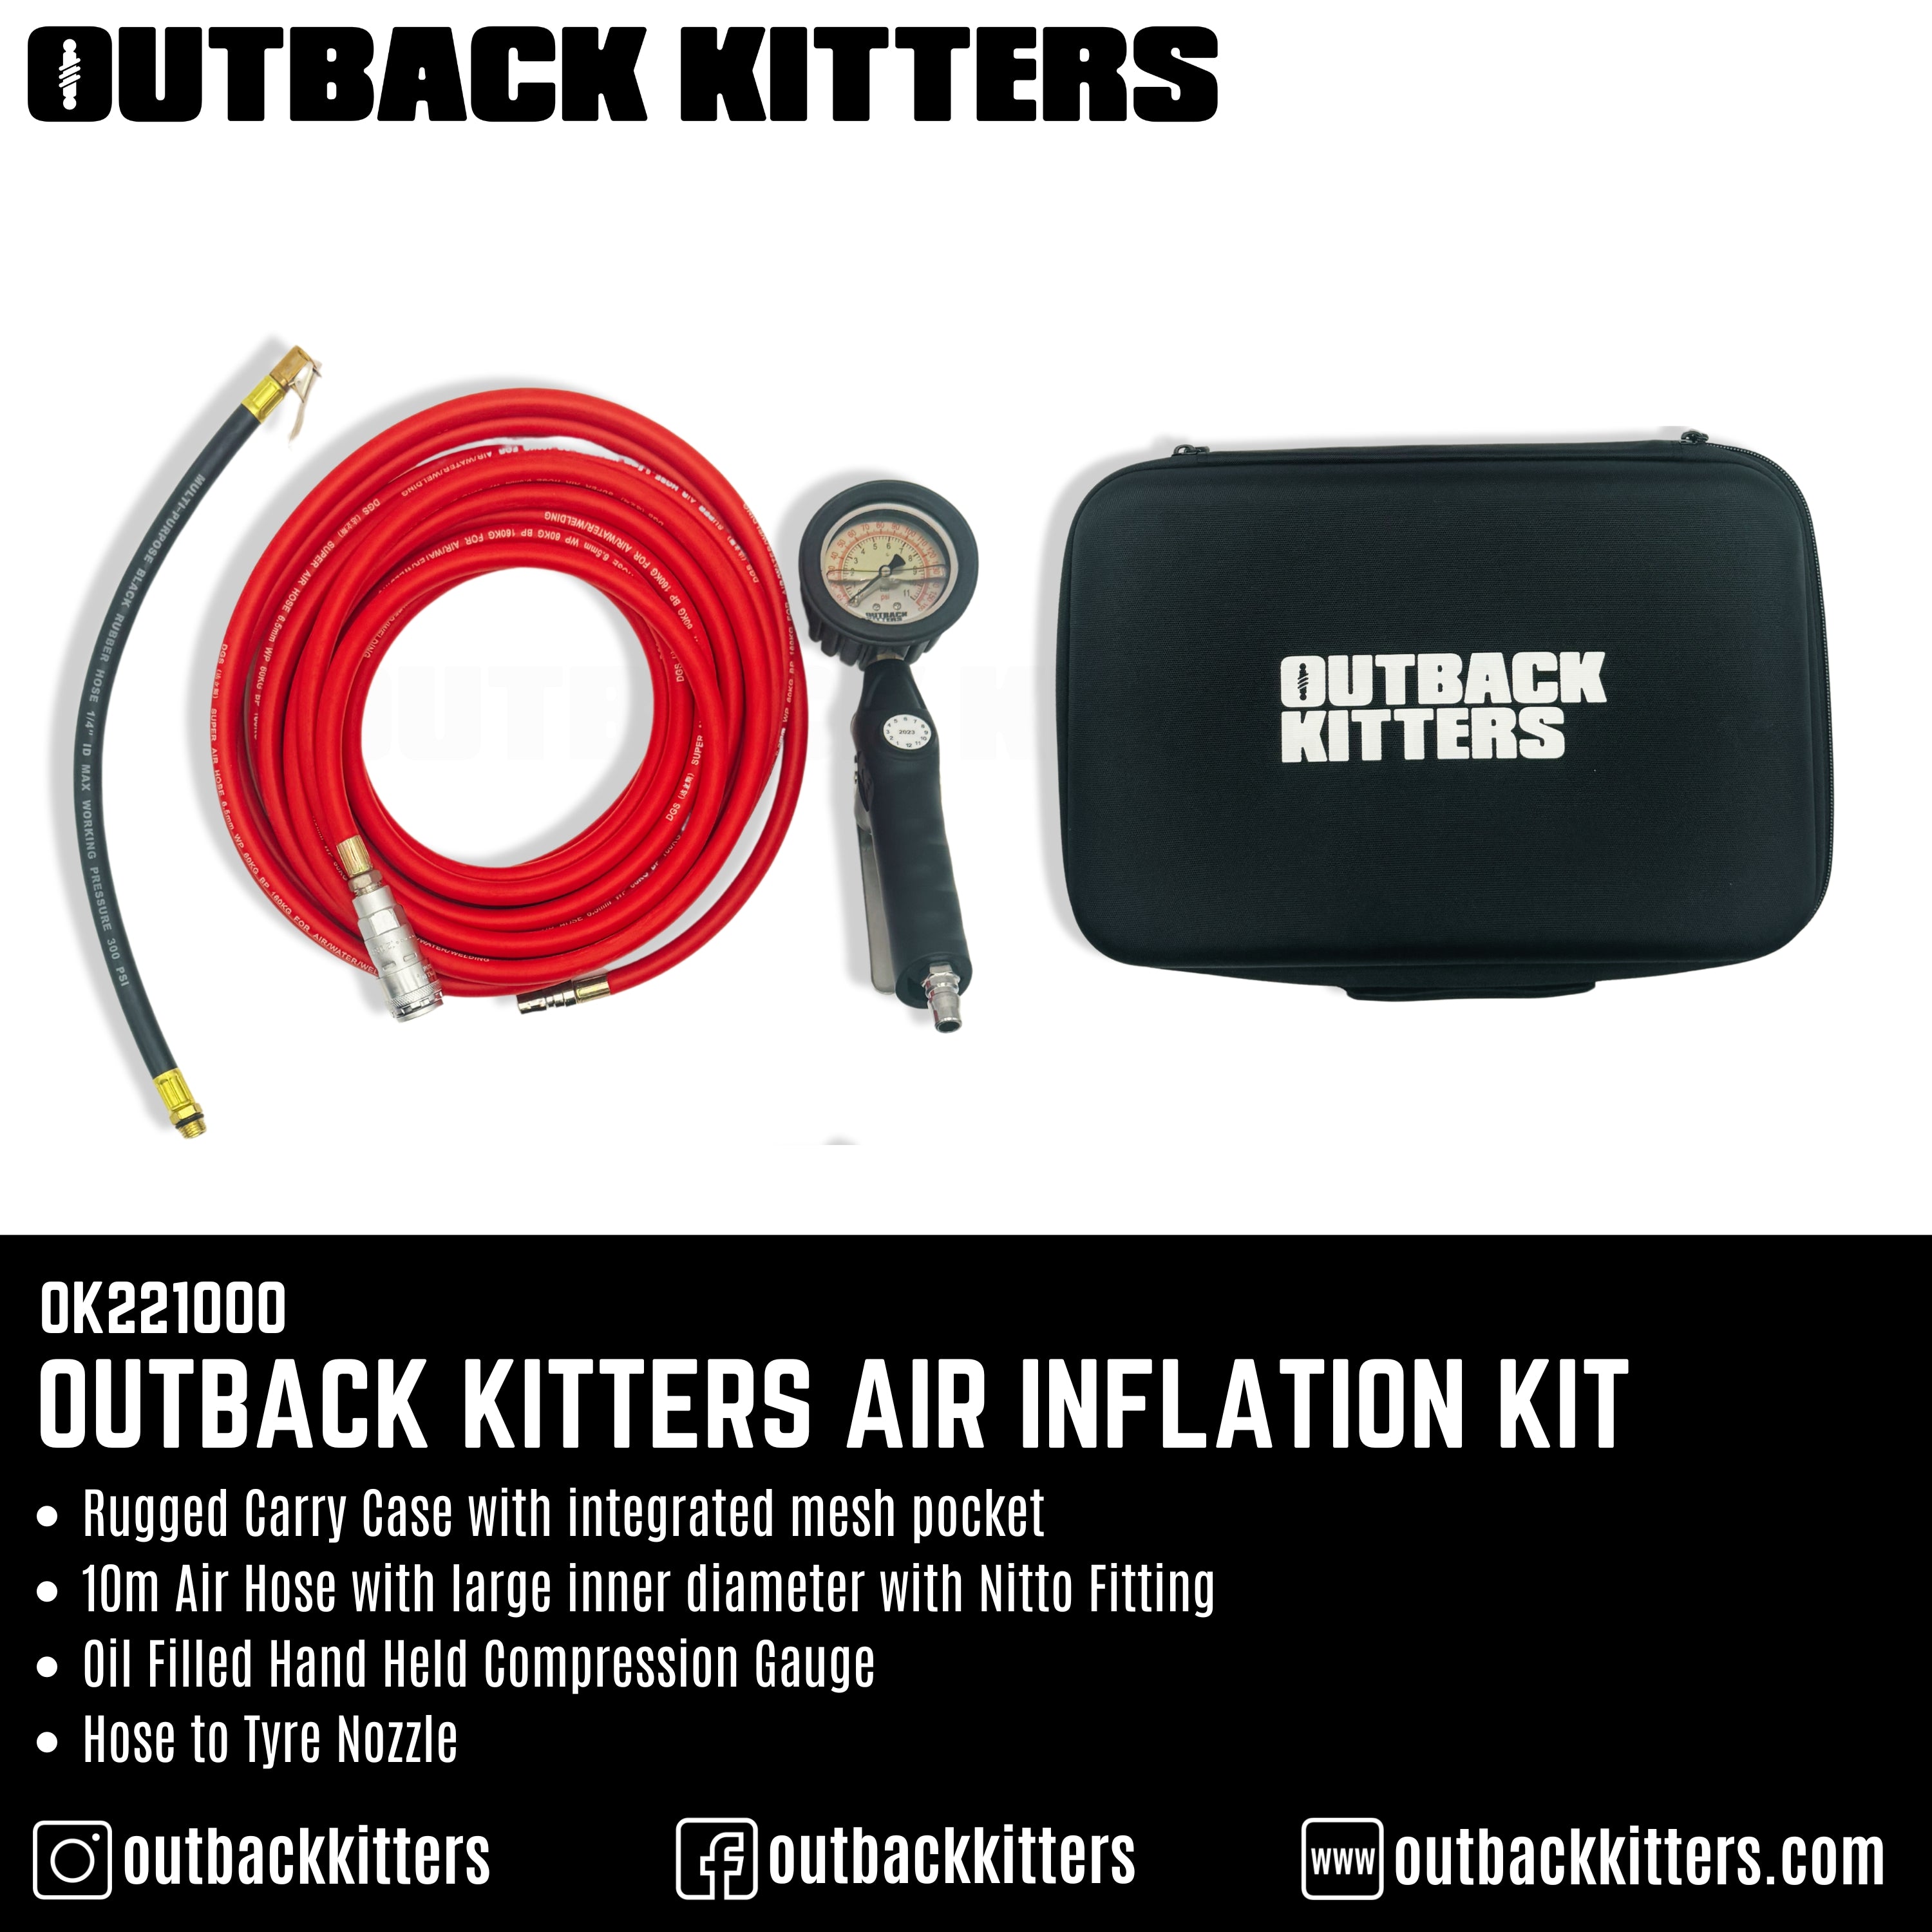 Outback Kitters Air Inflation Kit - Outback Kitters